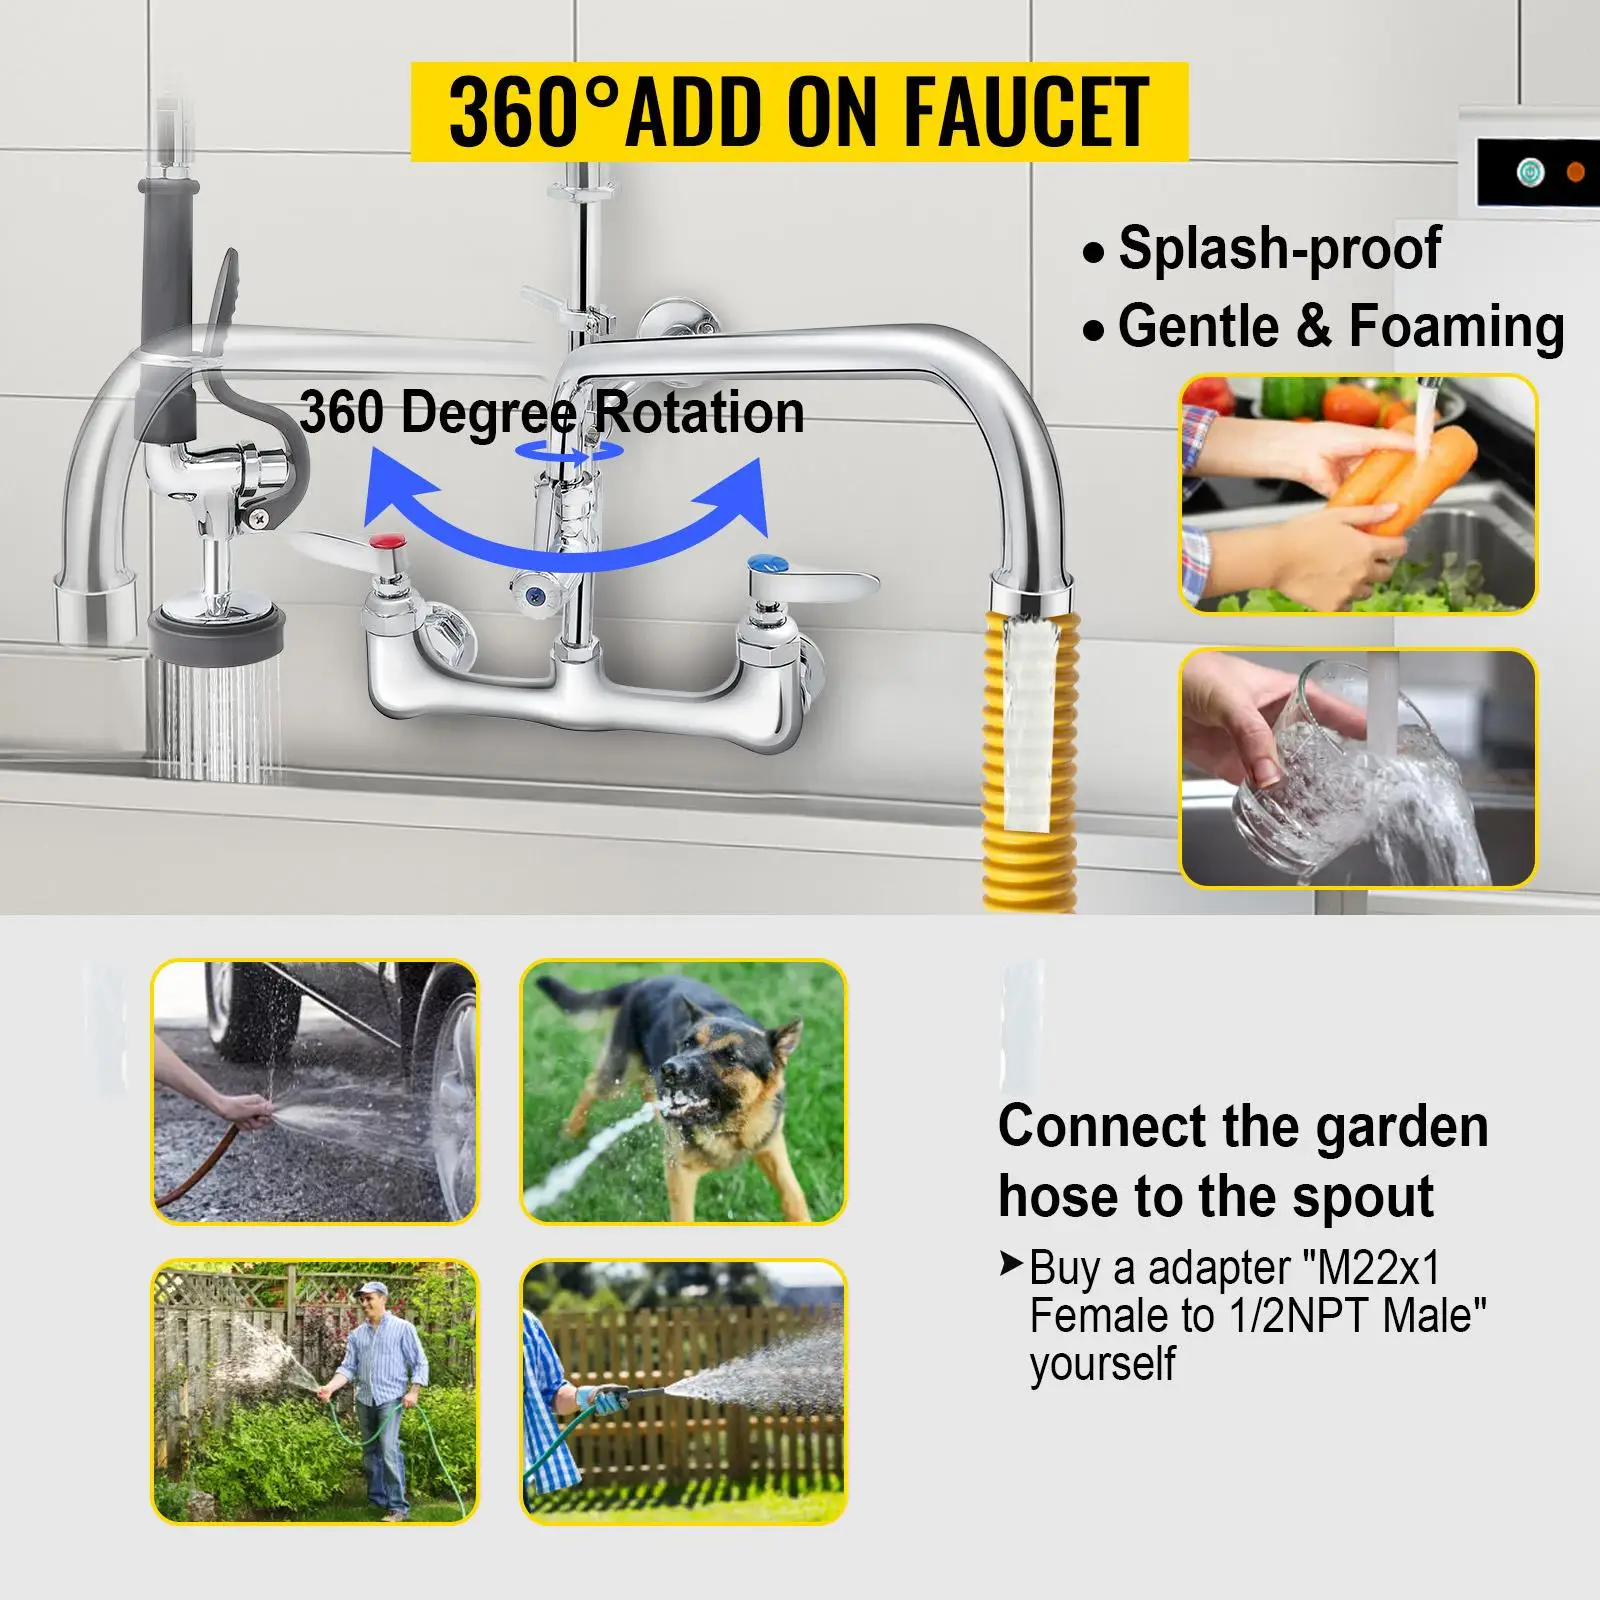 360-degree rotation kitchen faucet